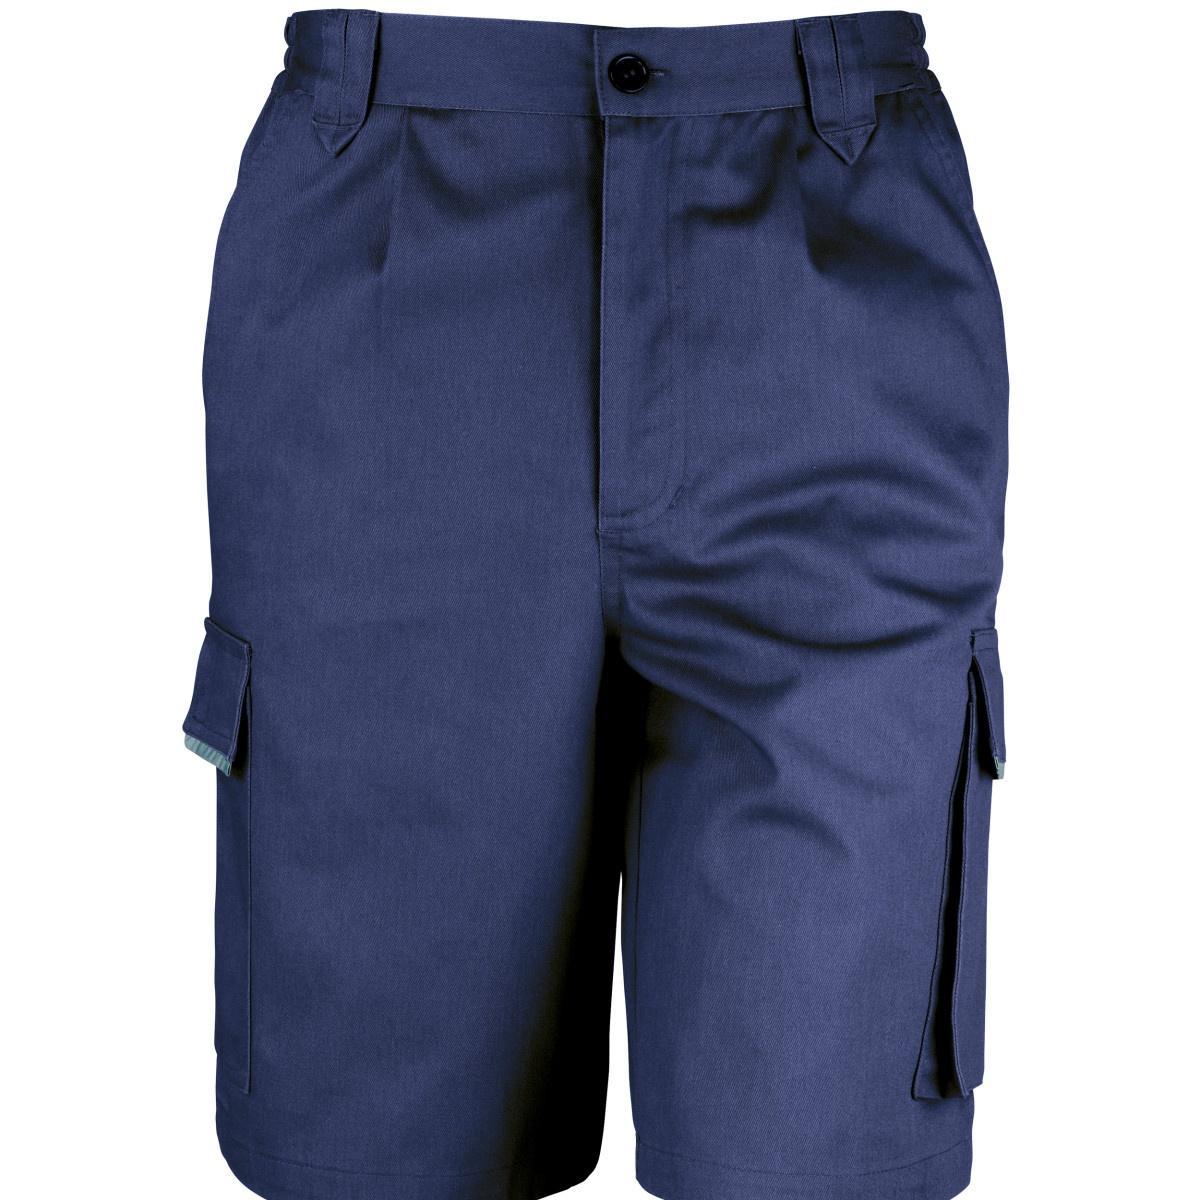 Result Unisex Work-Guard Action Shorts / Workwear (Navy Blue) (L)